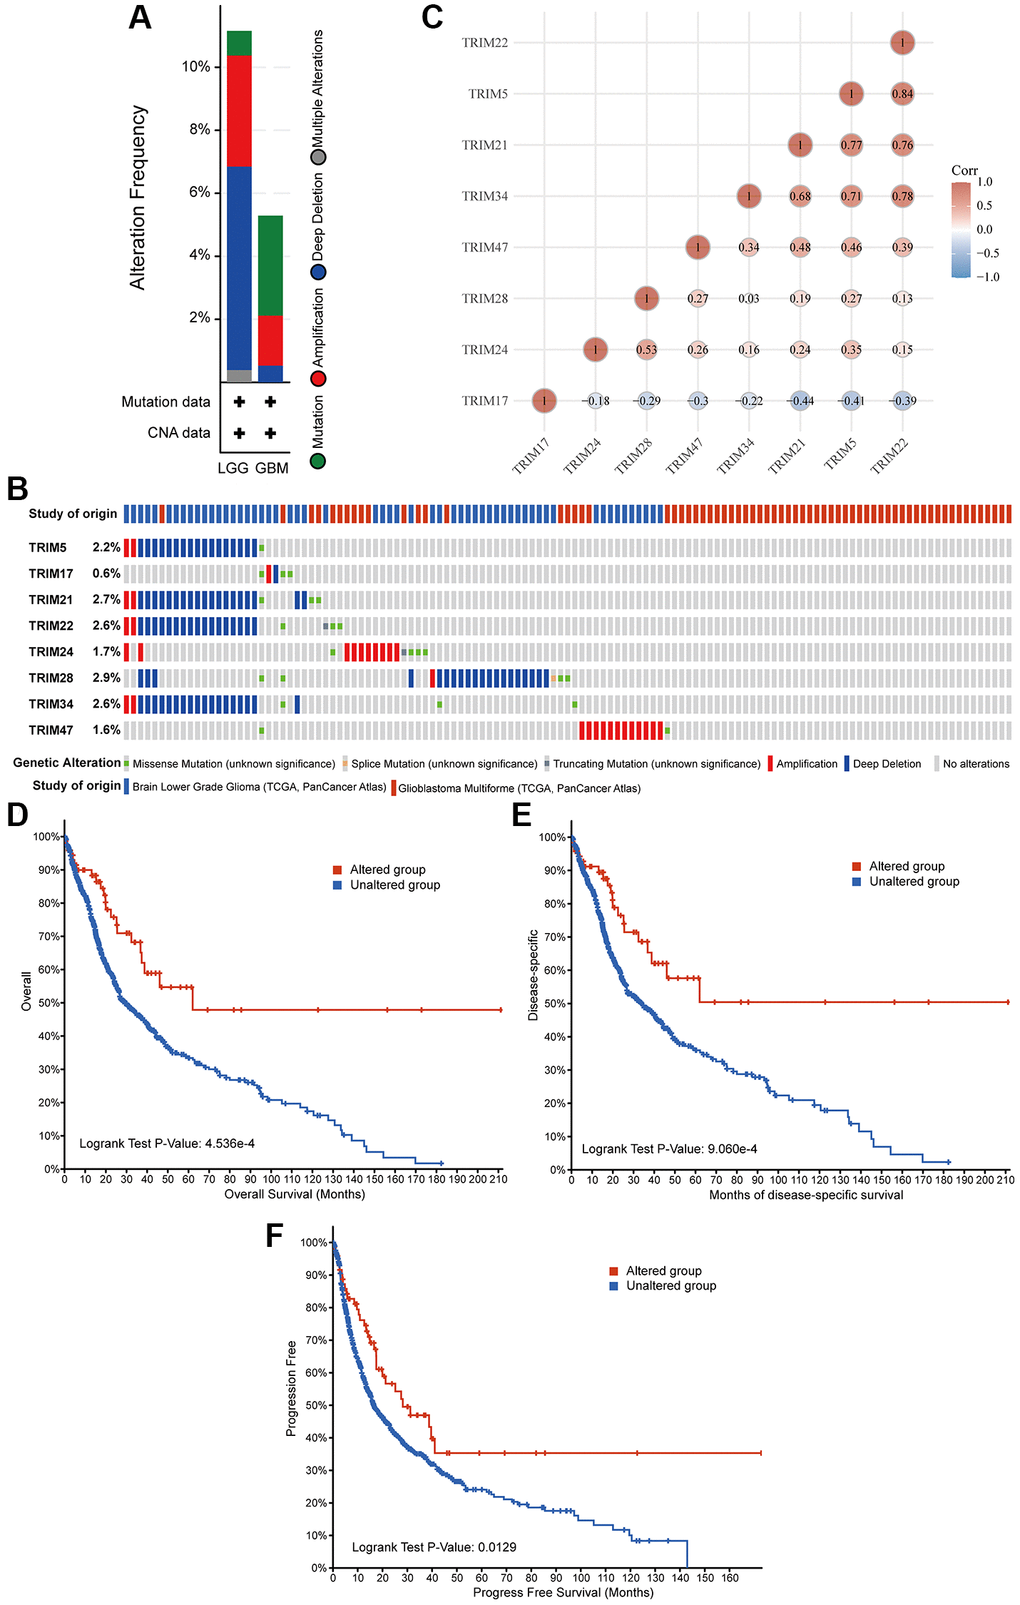 Genetic alterations in eight TRIM family members and their association with prognosis of glioma patients. Summary of alterations in different expressed TRIM families in gliomas (A, B). Correlations of different TRIM family members with each other (C). Genetic alterations in TRIM family were correlated to longer OS (D), DSS (E), PFS (F) of glioma patients. Abbreviation: PFS: progress-free survival.